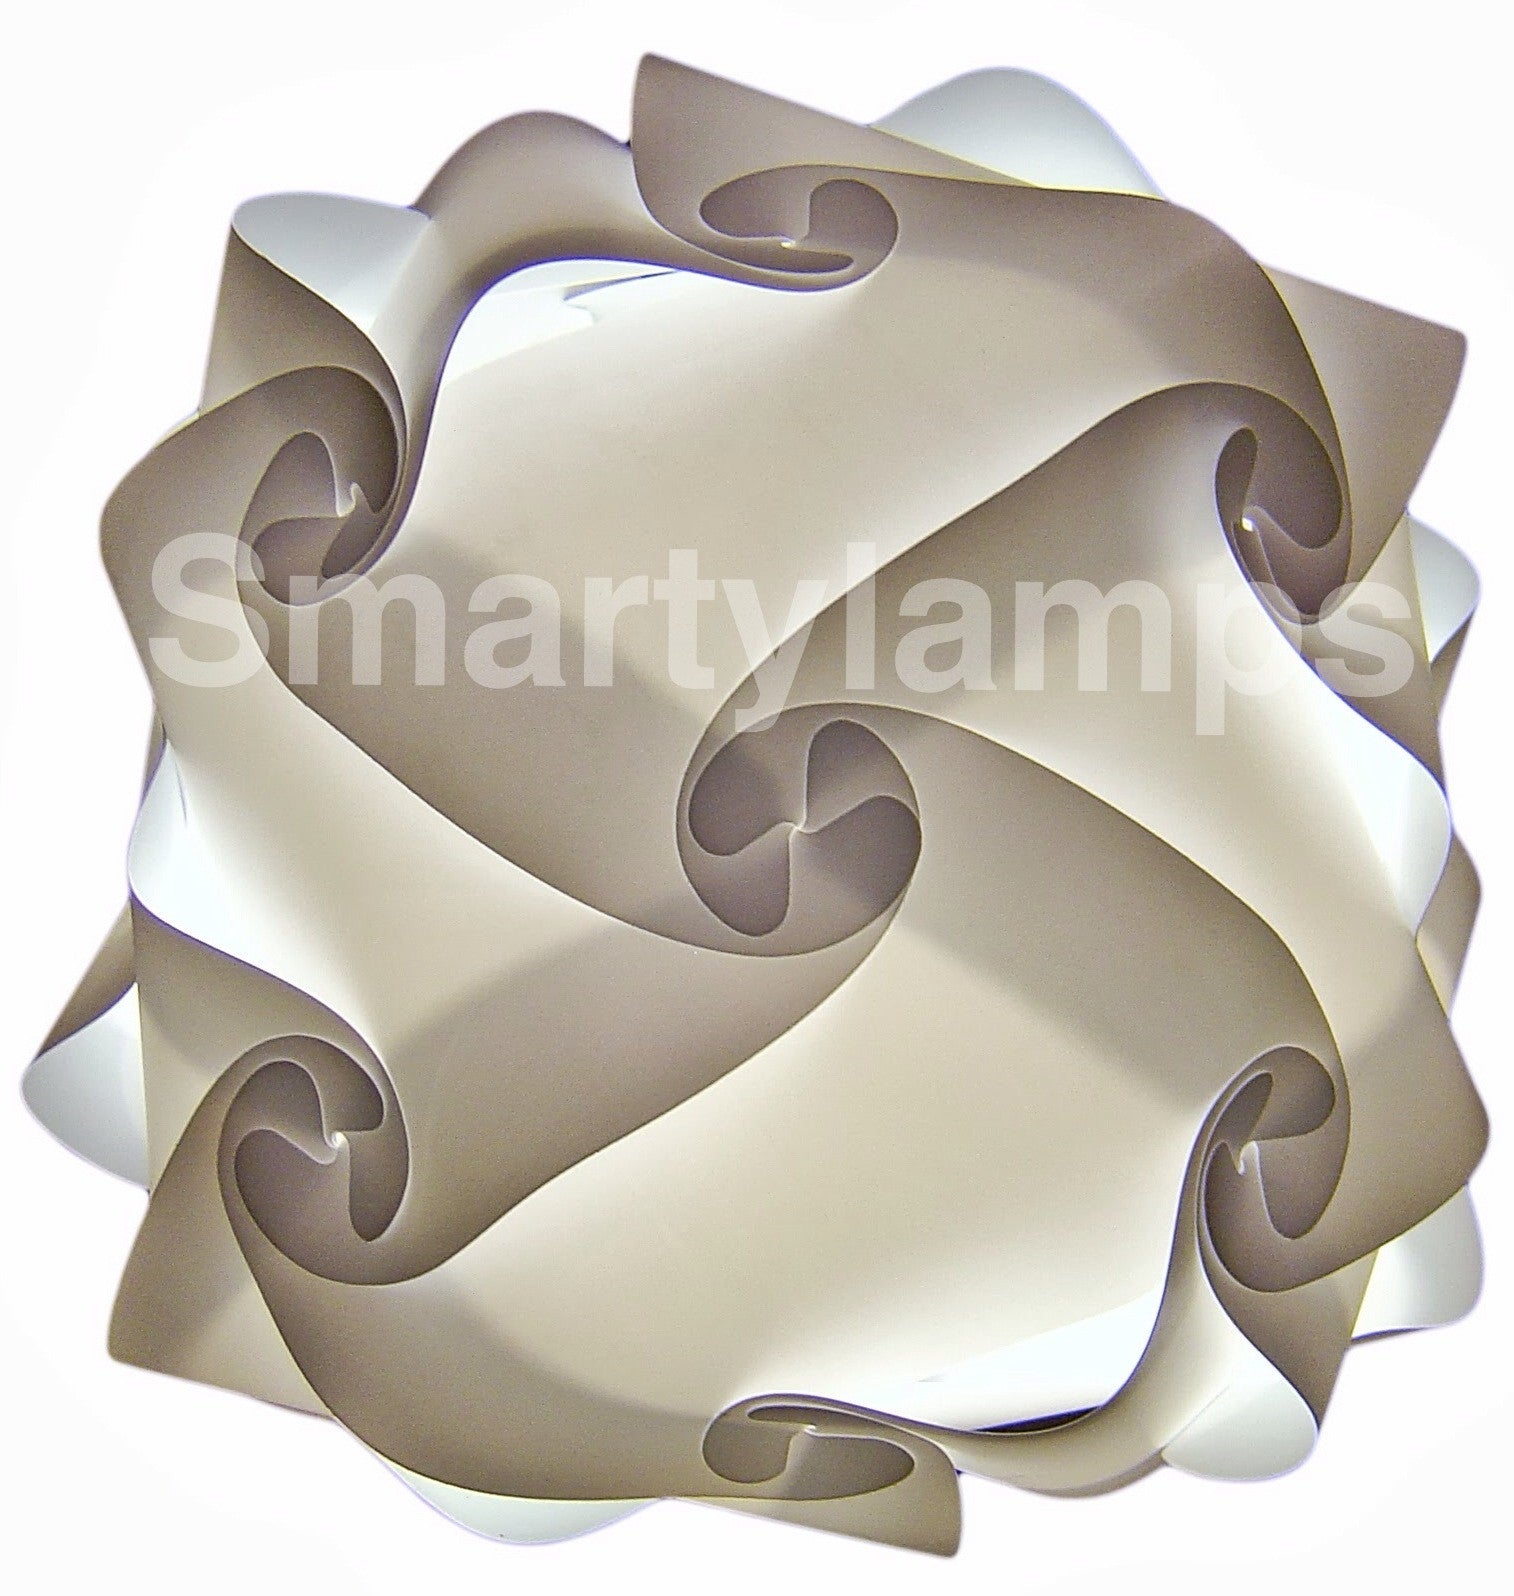 Smarty Lamps Lisbet Ceiling Lampshade  Smart Deco Homeware Lighting and Art by Jacqueline hammond